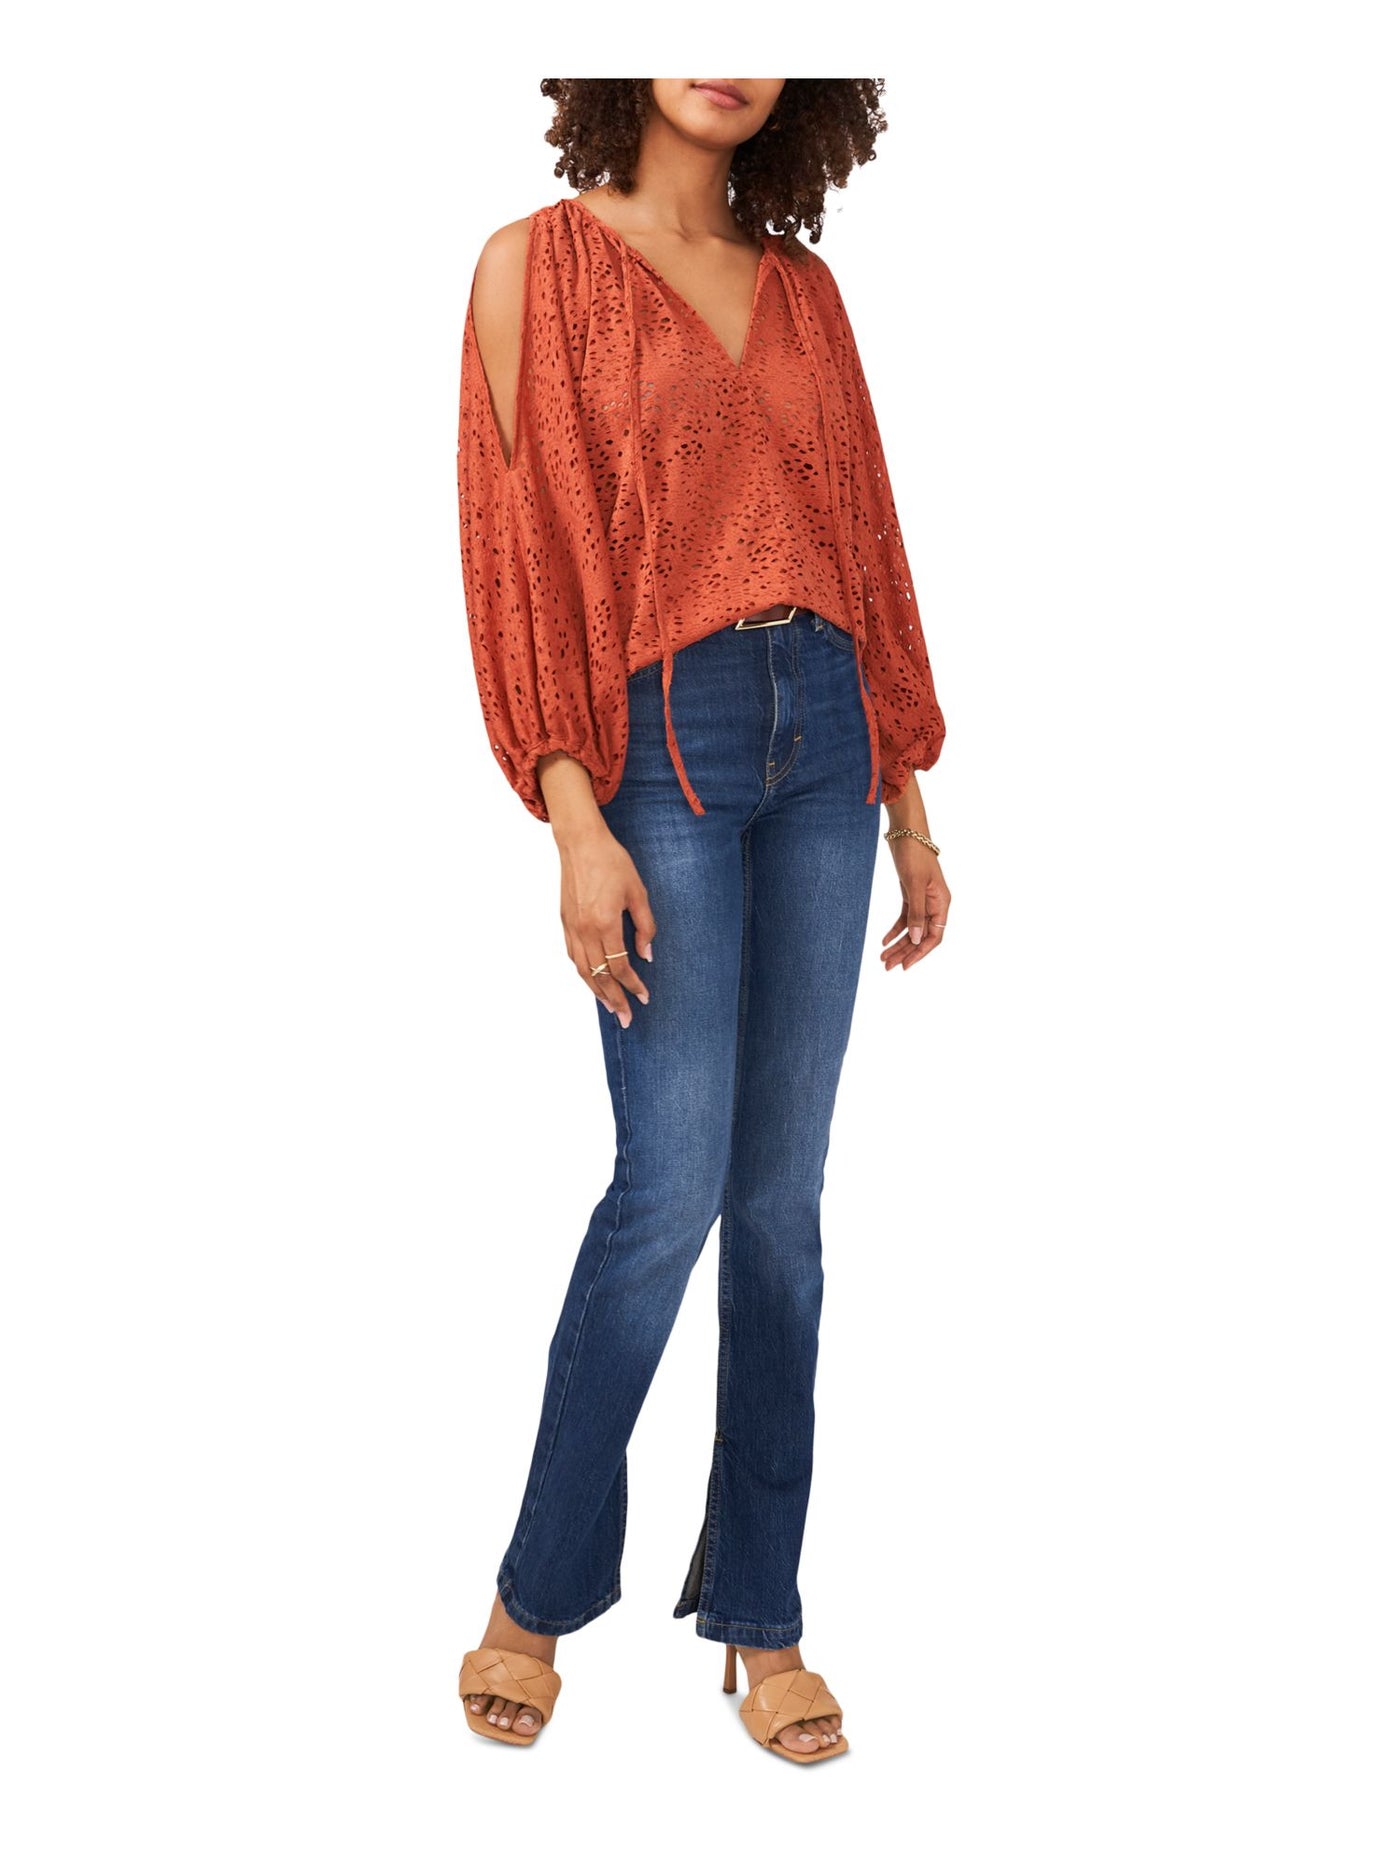 VINCE CAMUTO Womens Orange Tie Cold Shoulder Pullover Semi-sheer Unlined 3/4 Sleeve V Neck Top XS